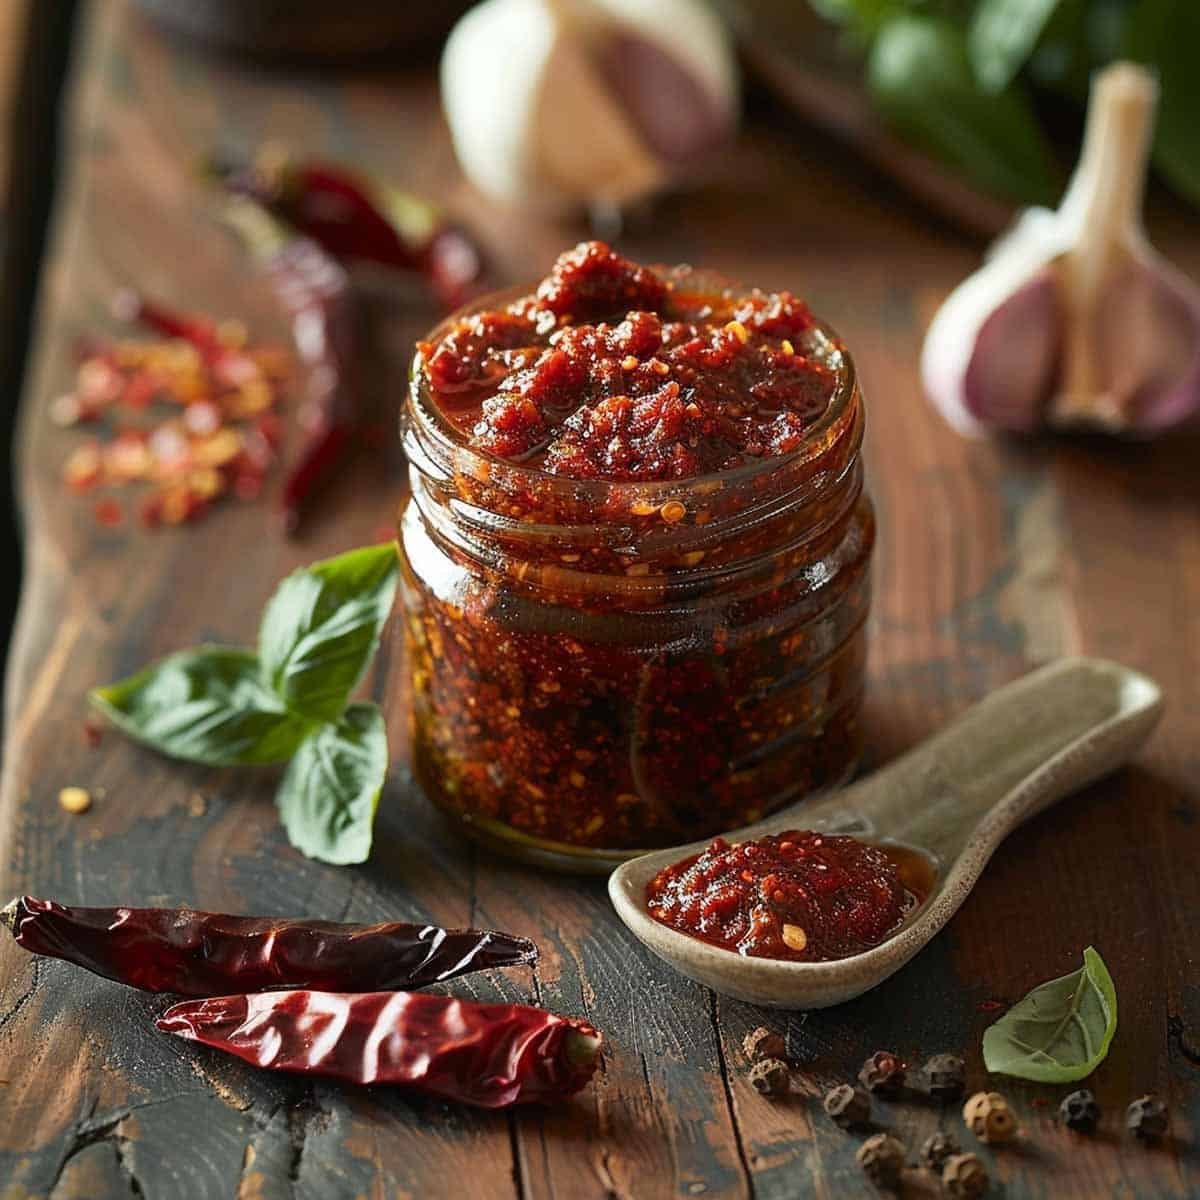 A jar of freshly made Nam Prik Pao Thai Chili Paste sits ready for use, showcasing its rich, dark texture and vibrant spices.